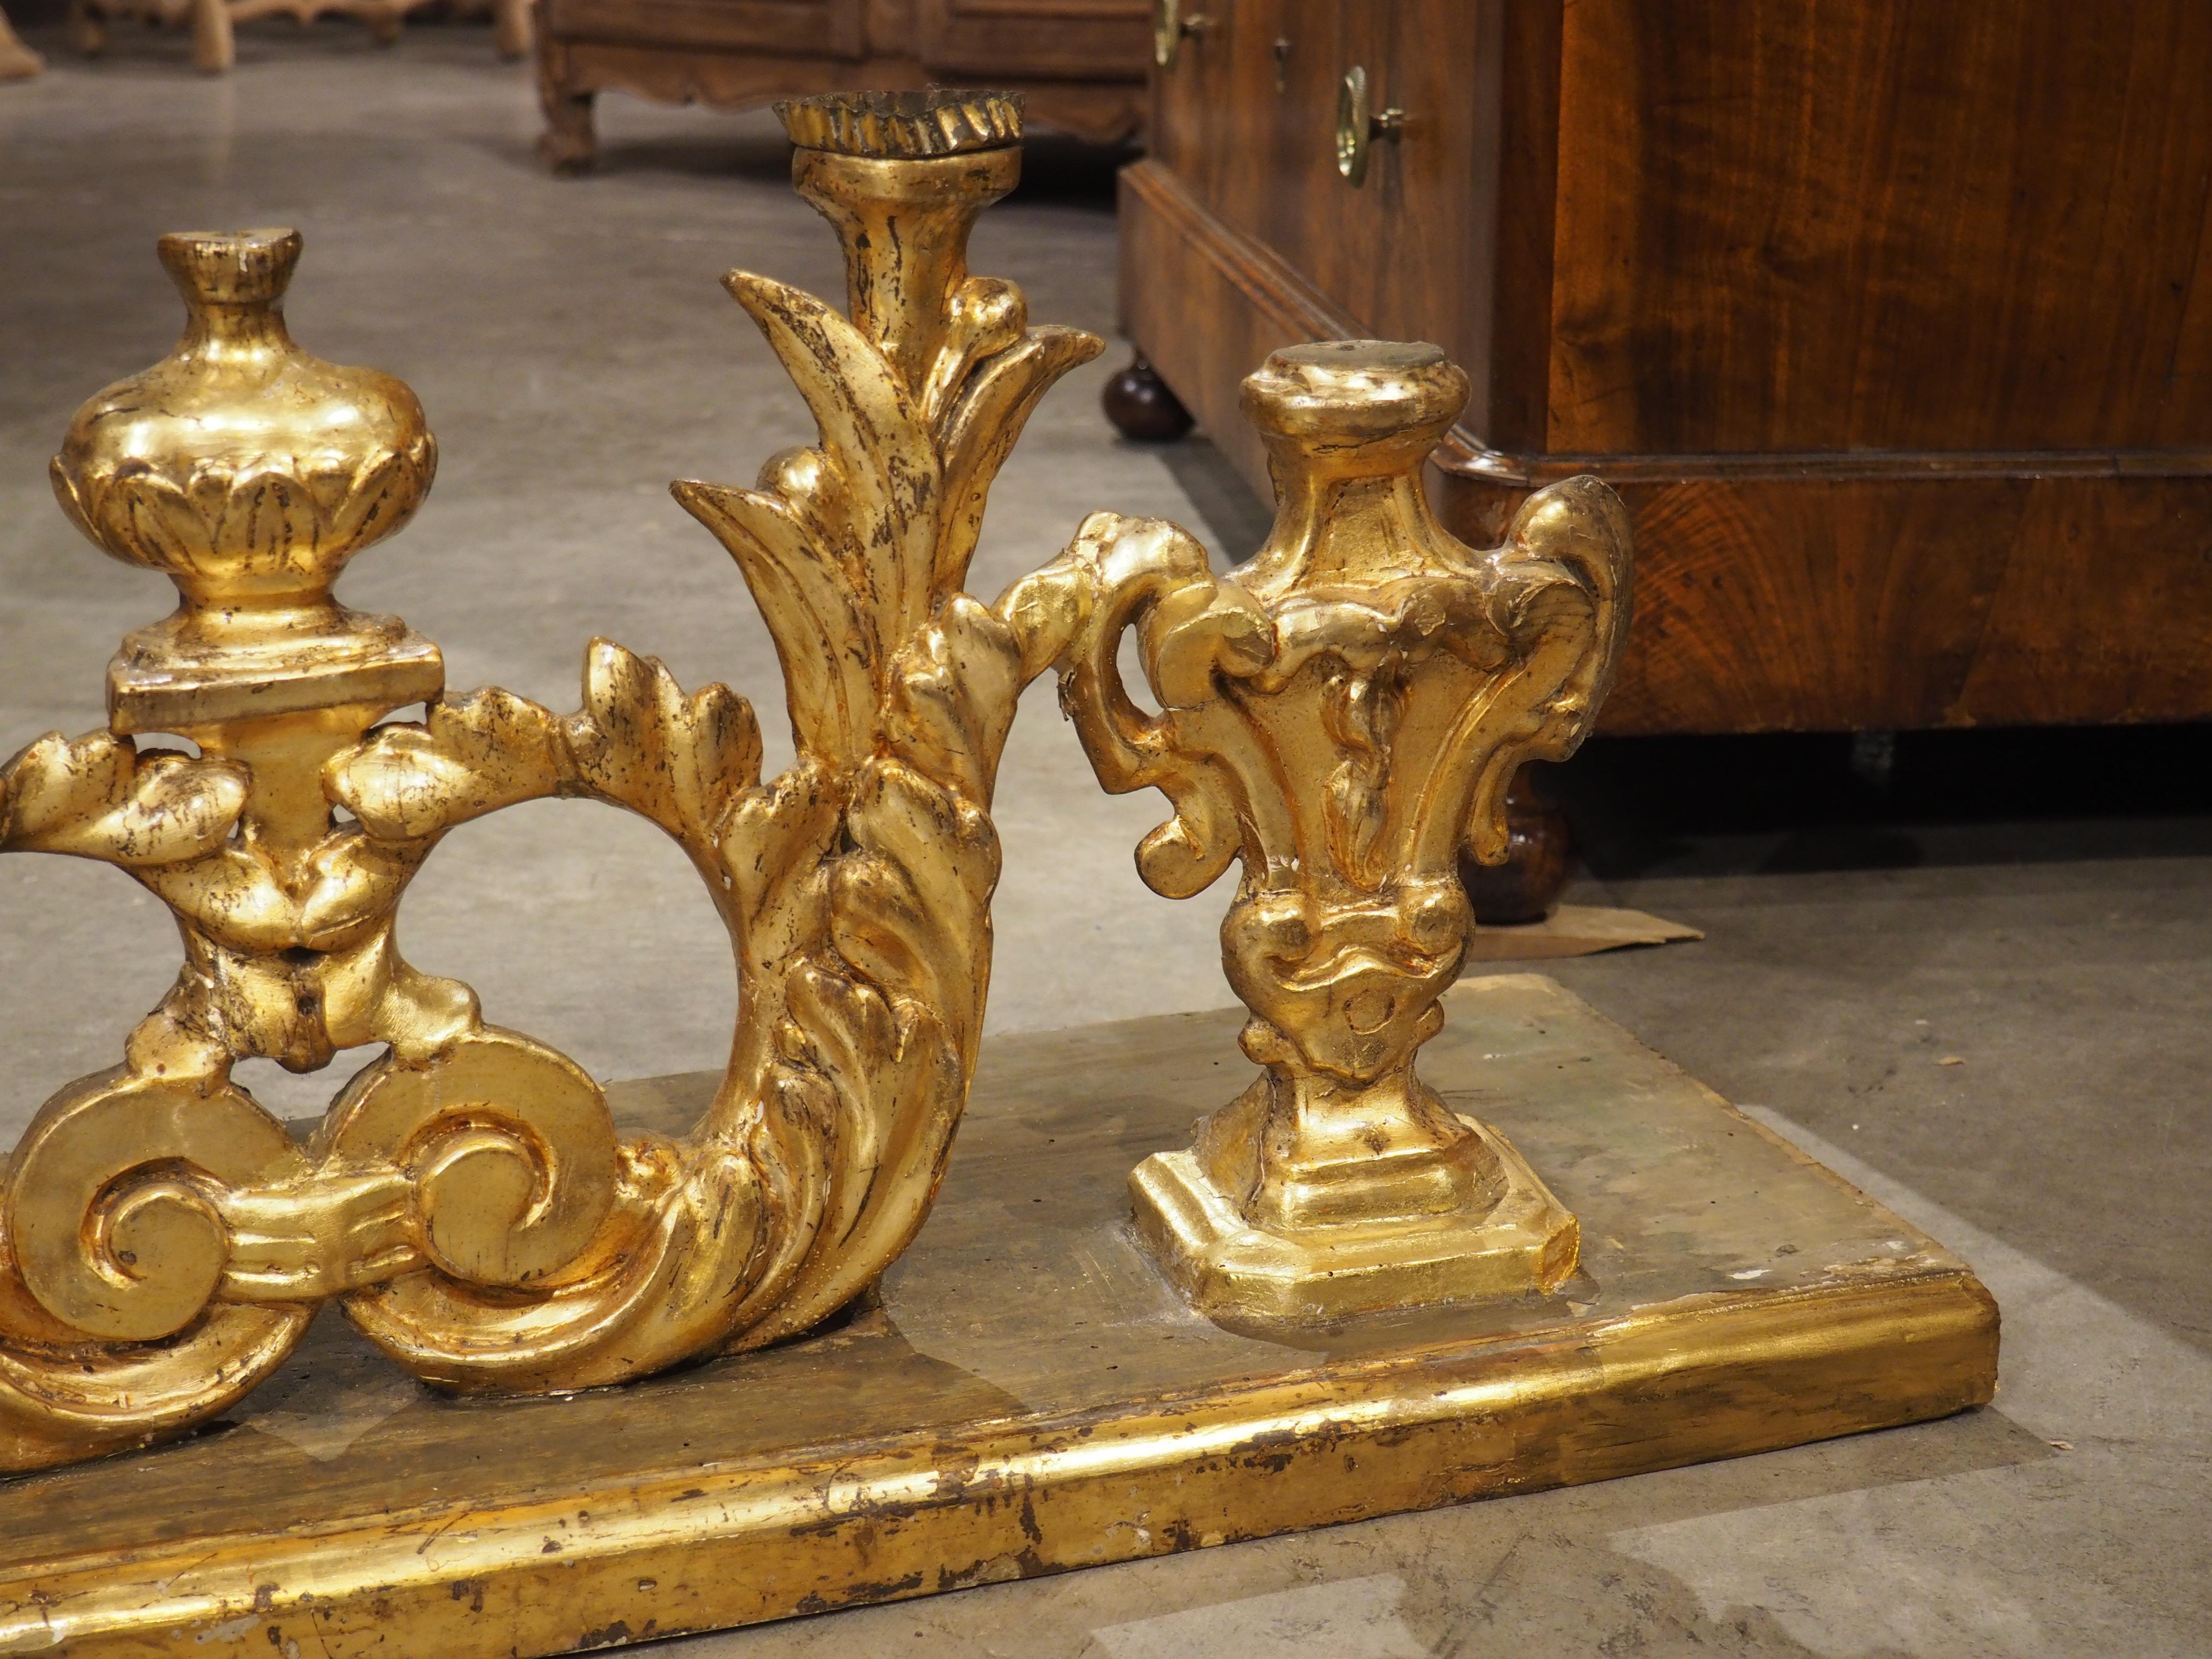 Circa 1750 Carved and Gilded Altar Candelabra from Tuscany, Italy 73 inches Long For Sale 1